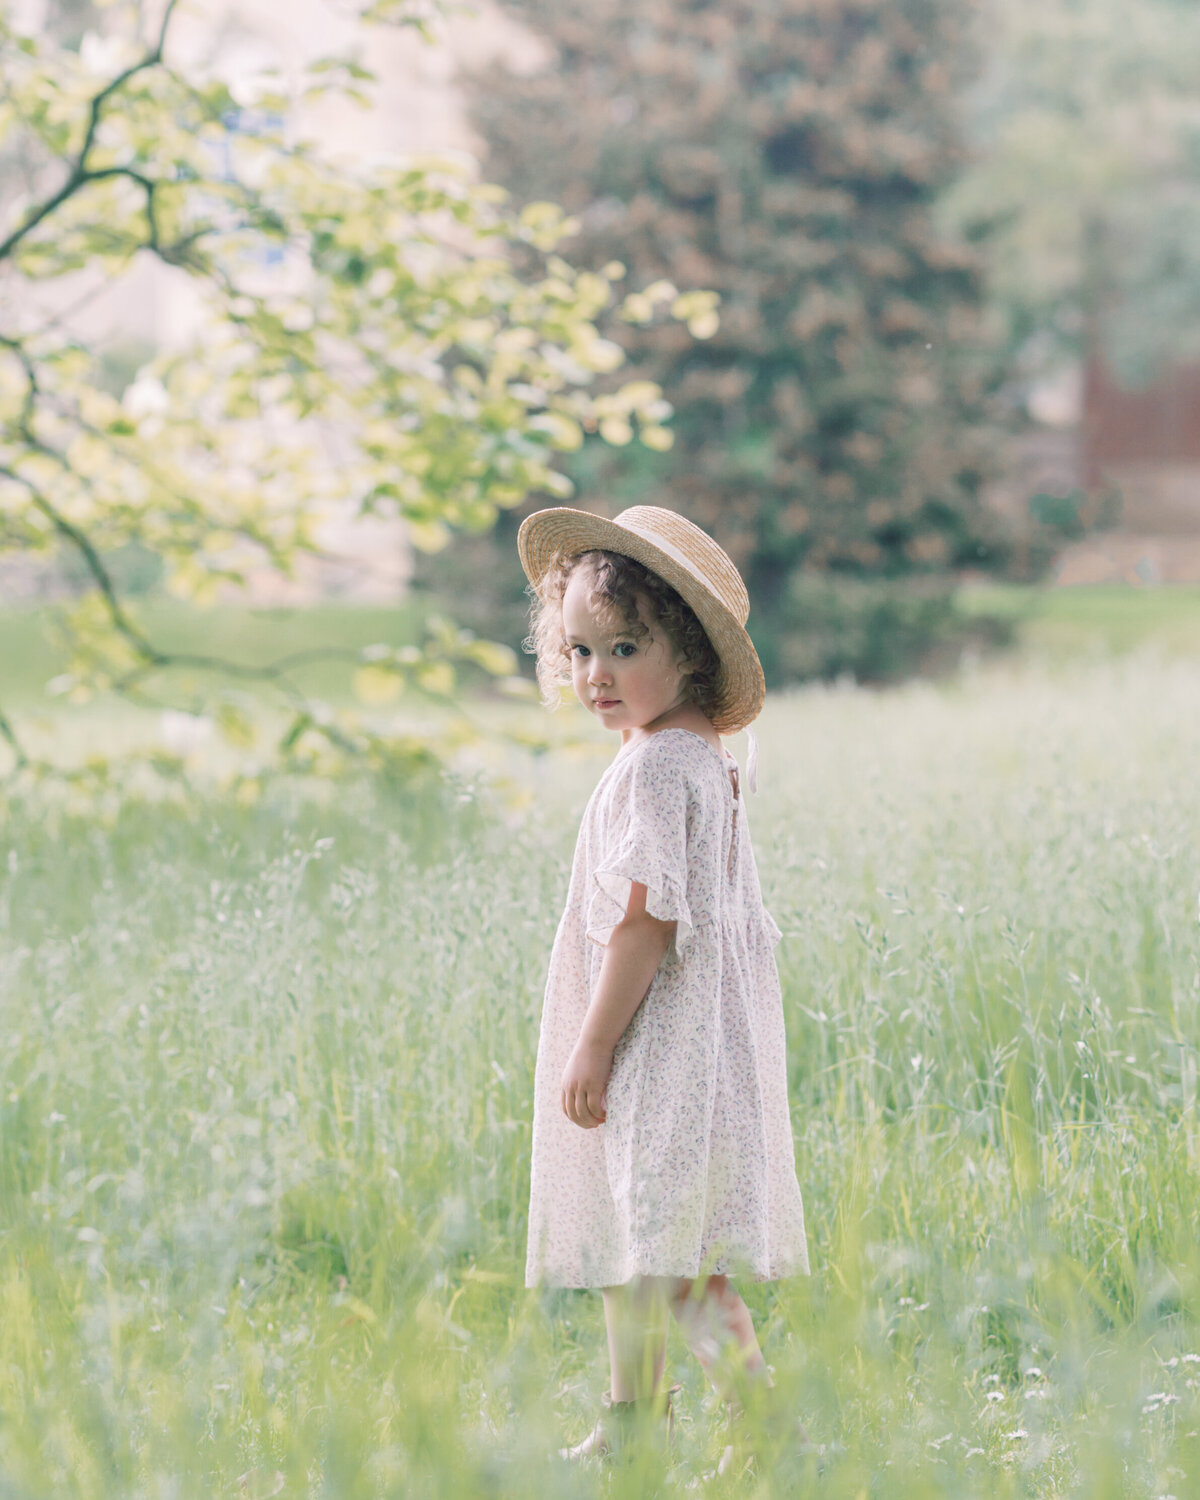 Little girl in a straw hat and dress standing in tall grass looking towrads the camera by Savannah Family photographer Courtney Cronin